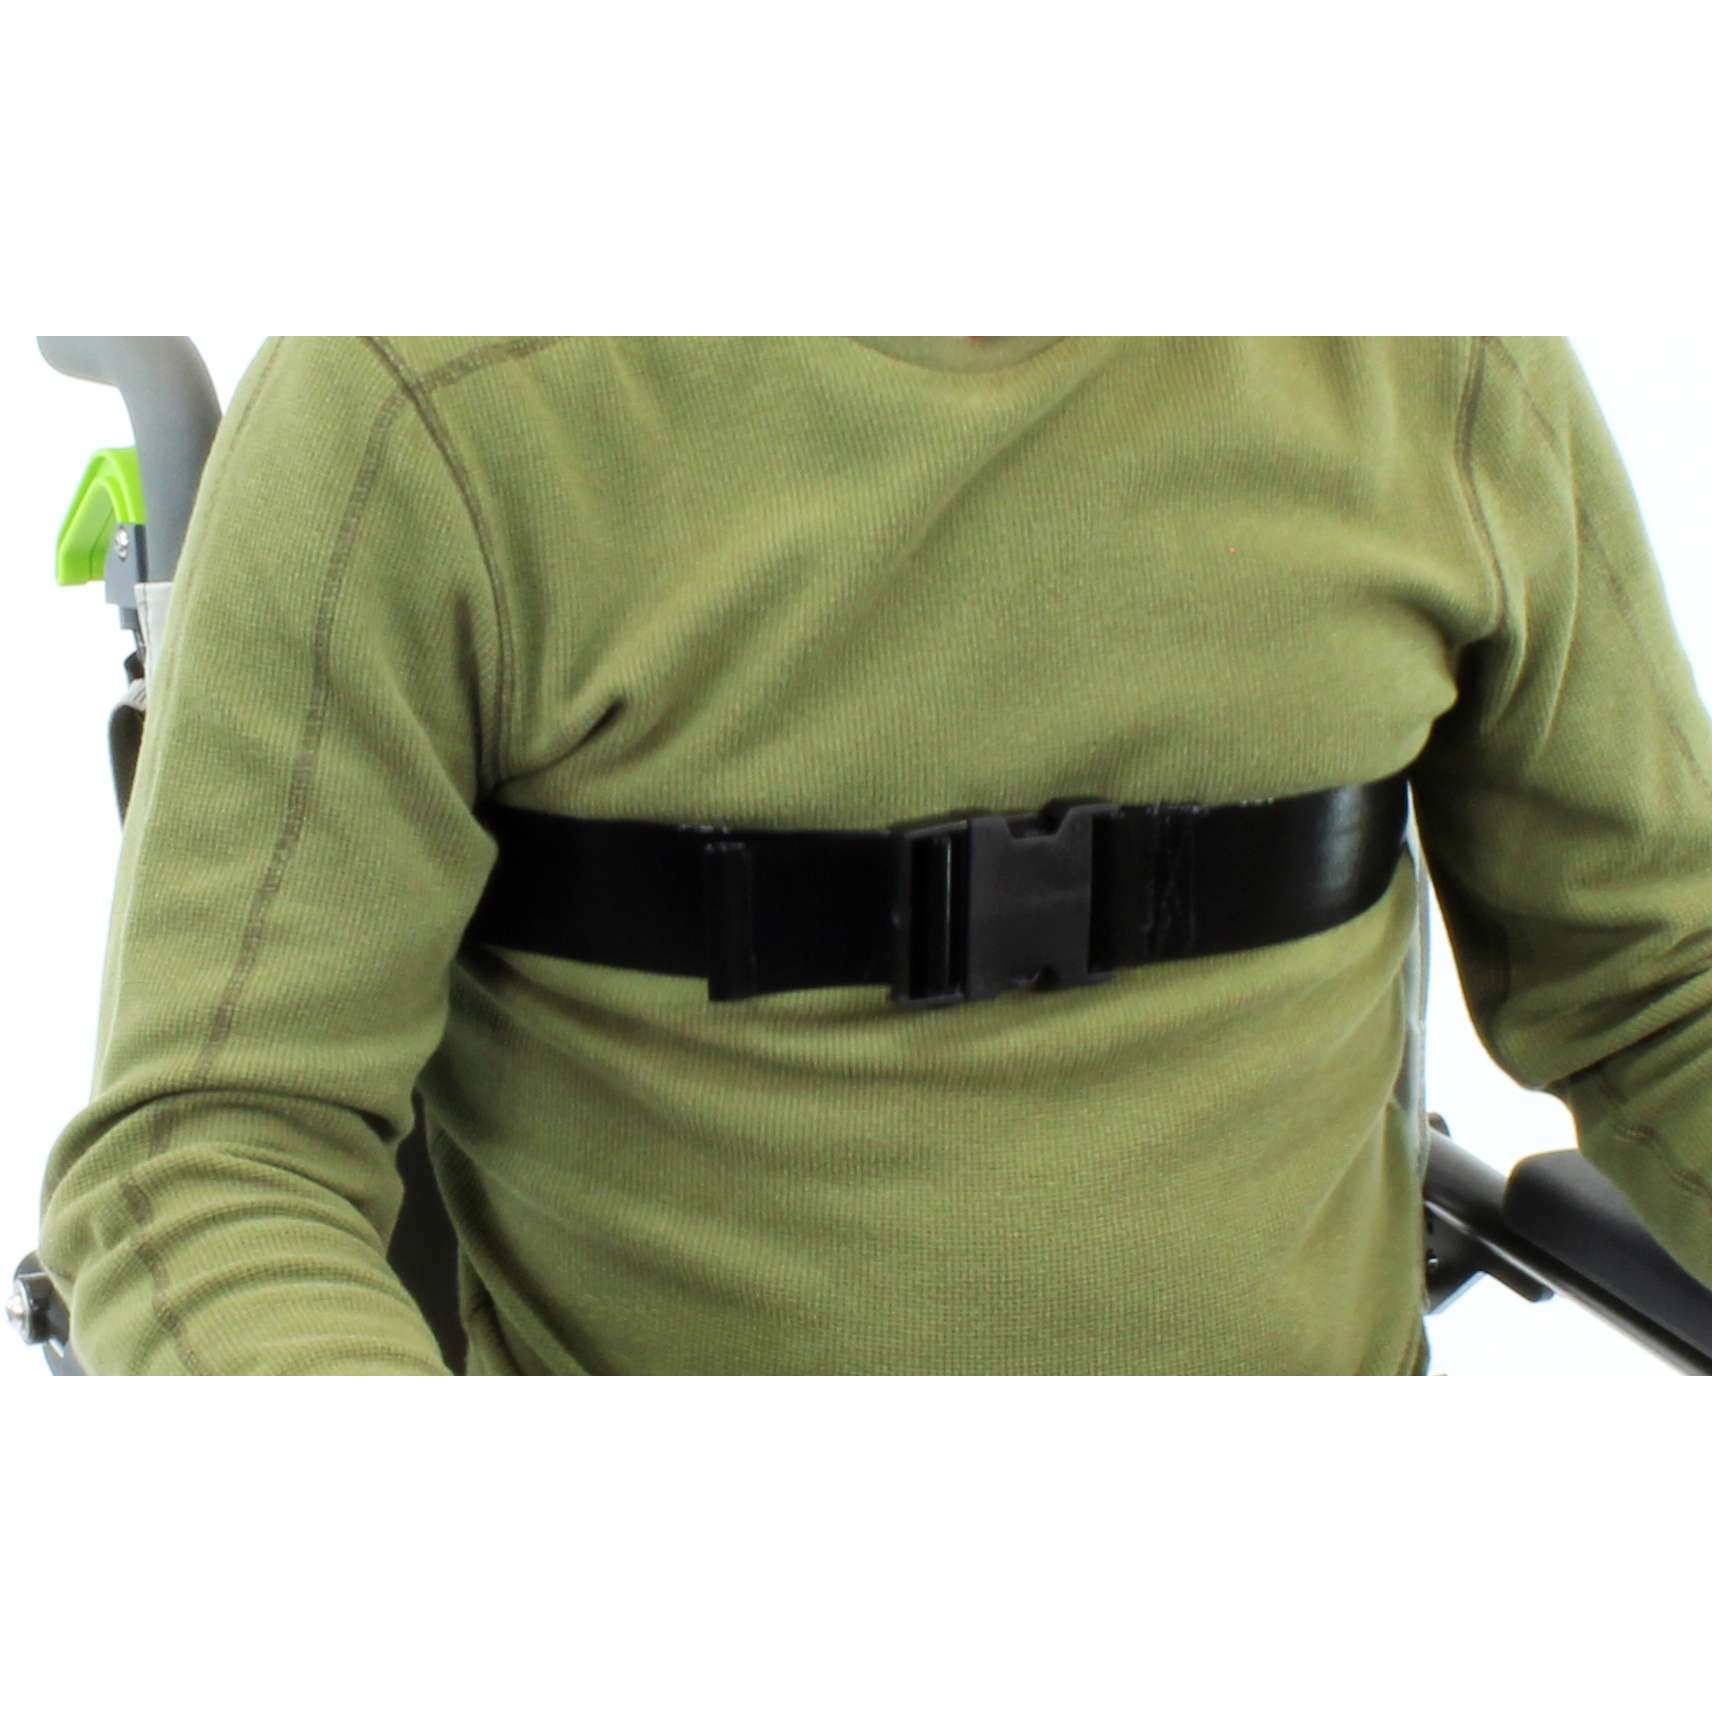 Infection Control Chest Belt - Small (1 piece with side release buckle) (for 14" - 16" back frame widths) (ZCBICS)